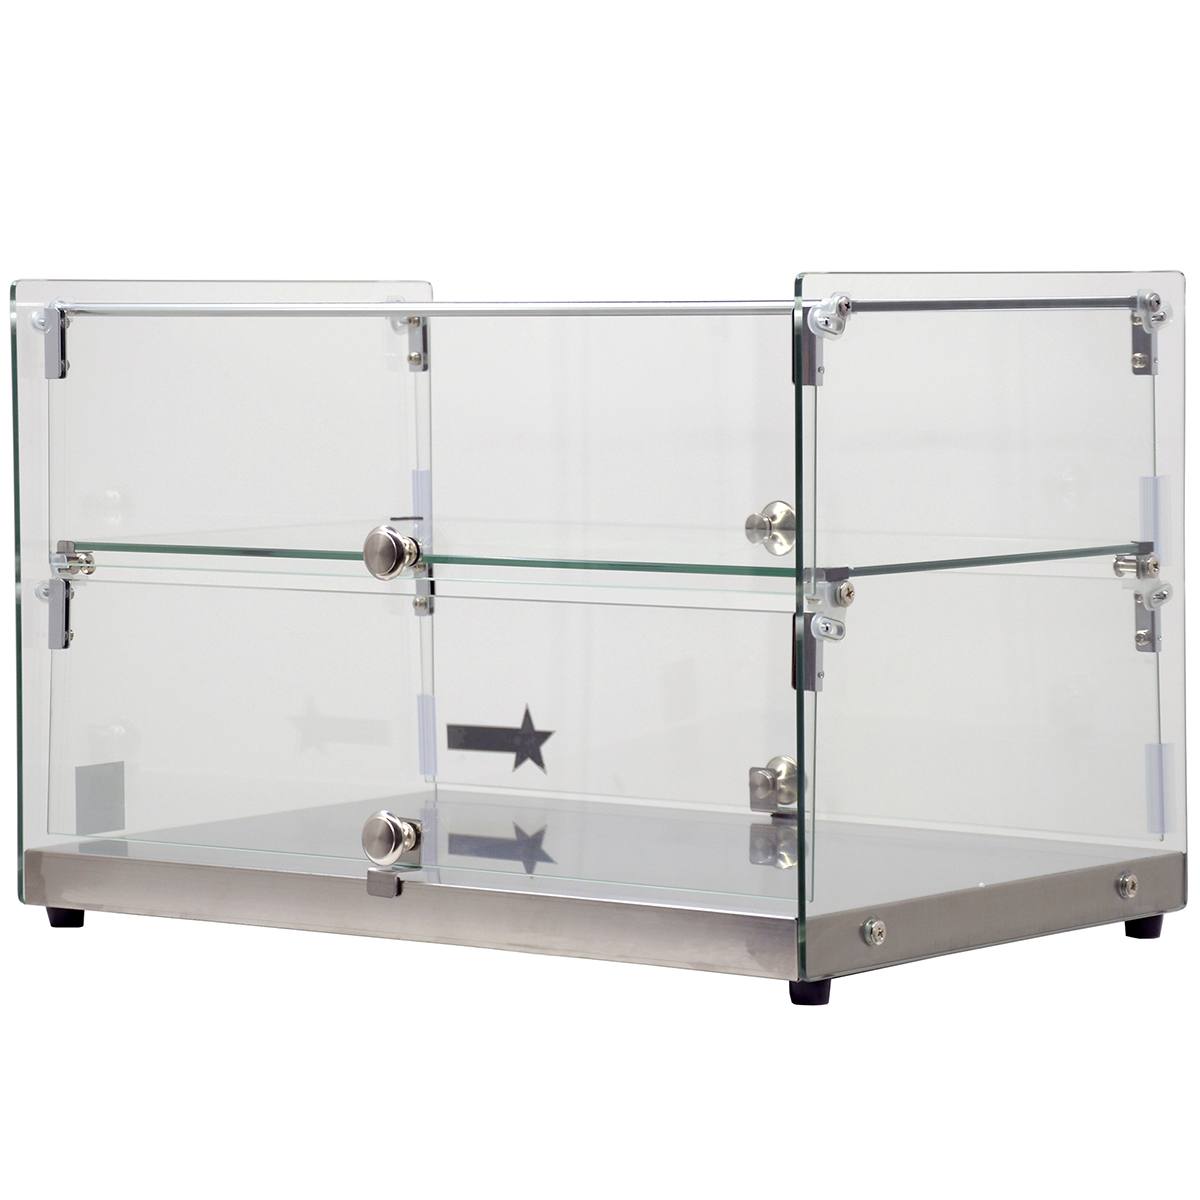 Omcan 44373 Countertop Food Display Case w/Square Front Glass, 22"W, 50 L Capacity image 2